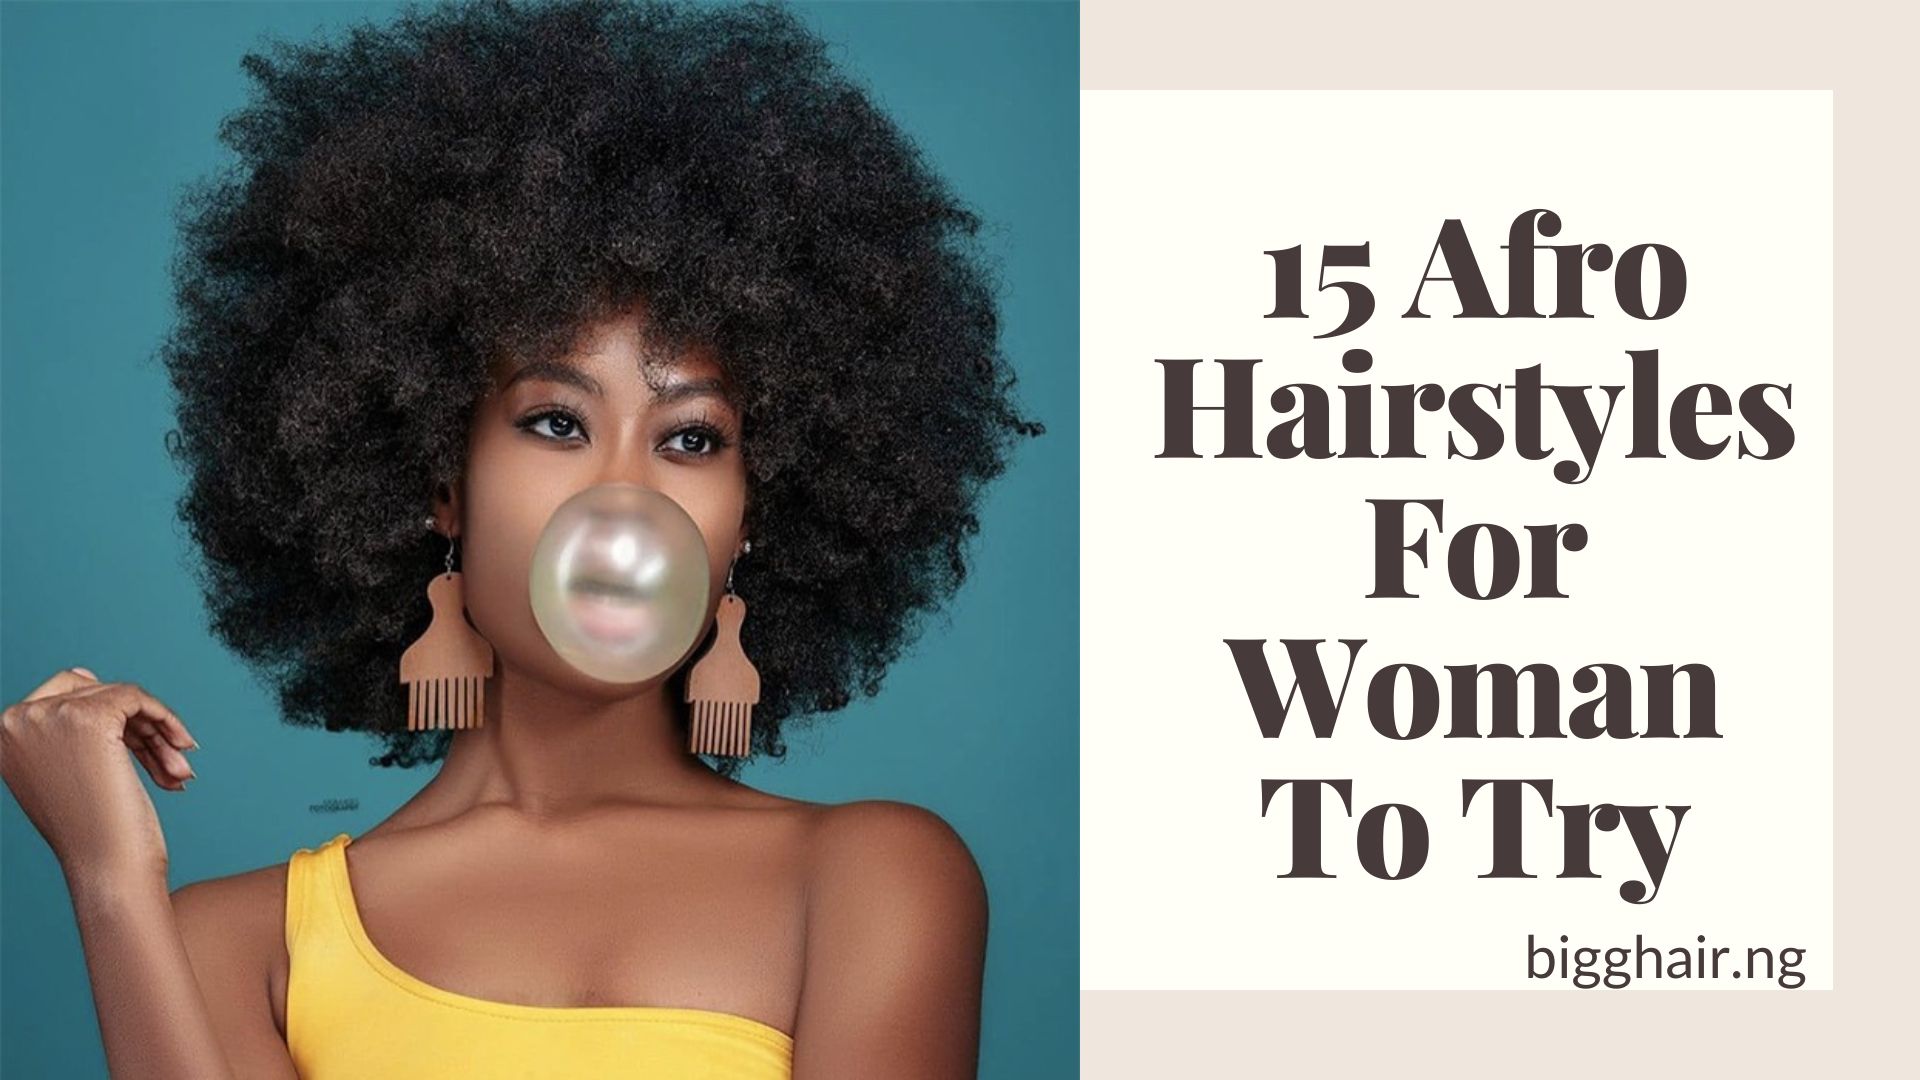 15 Afro Hairstyles For Woman To Try - BigG Hair Nigeria